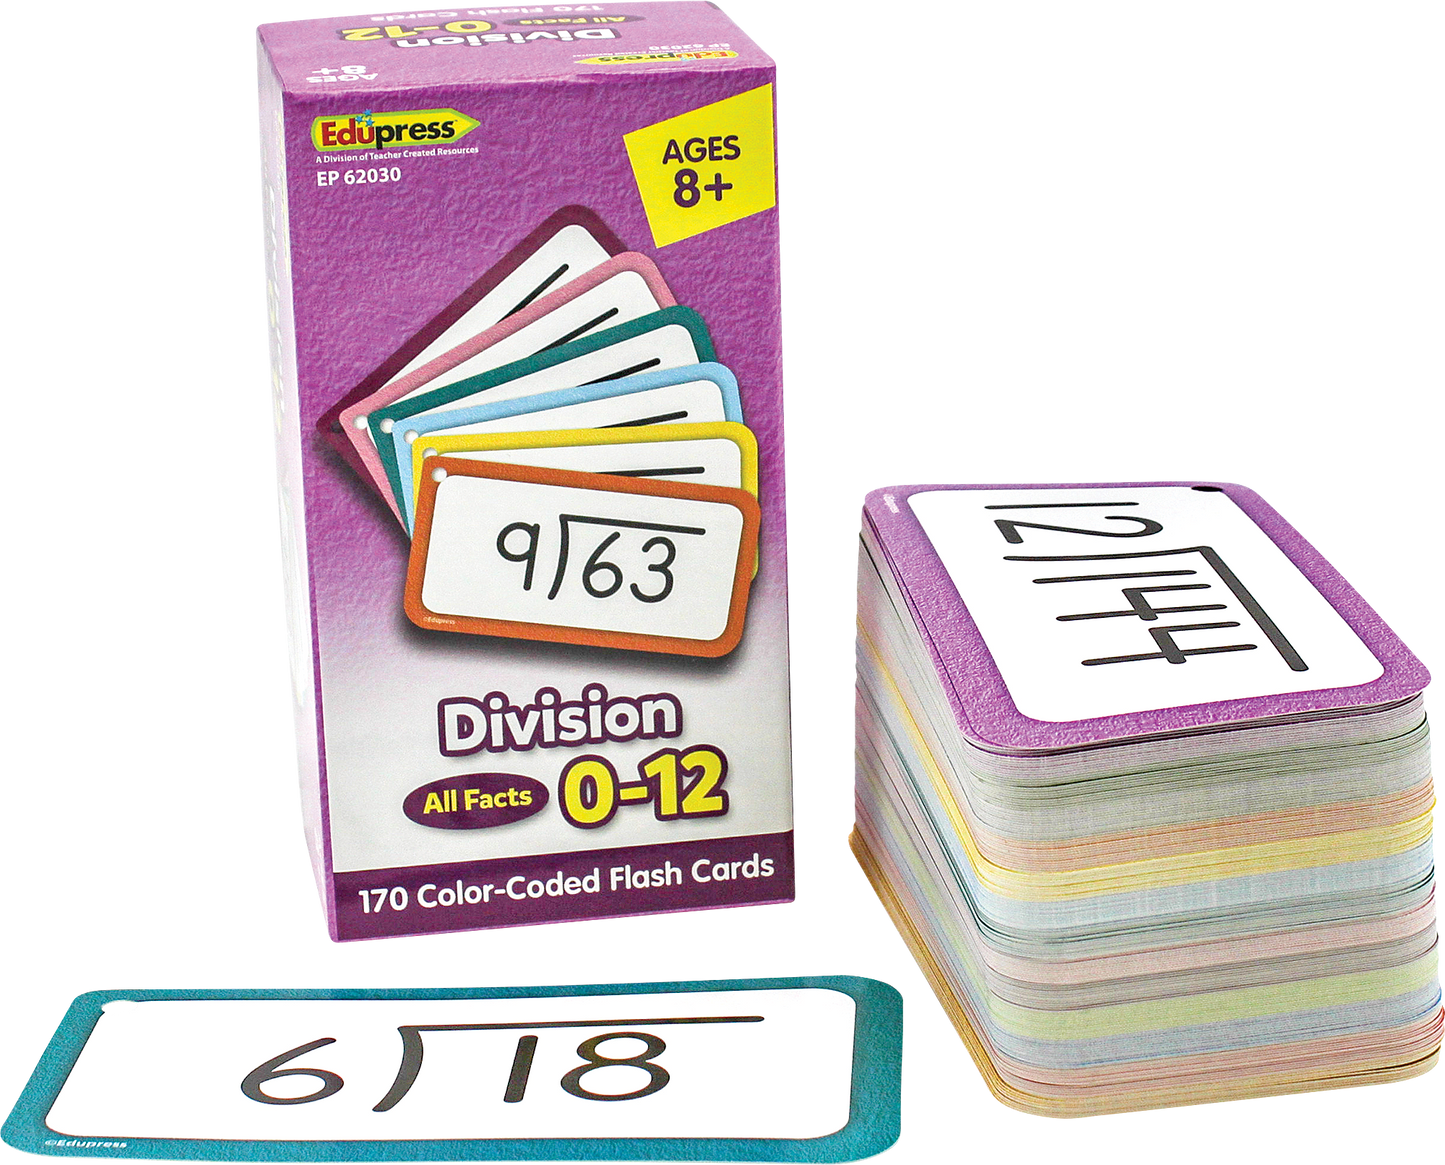 Division Flash Cards - All Facts 0-“12